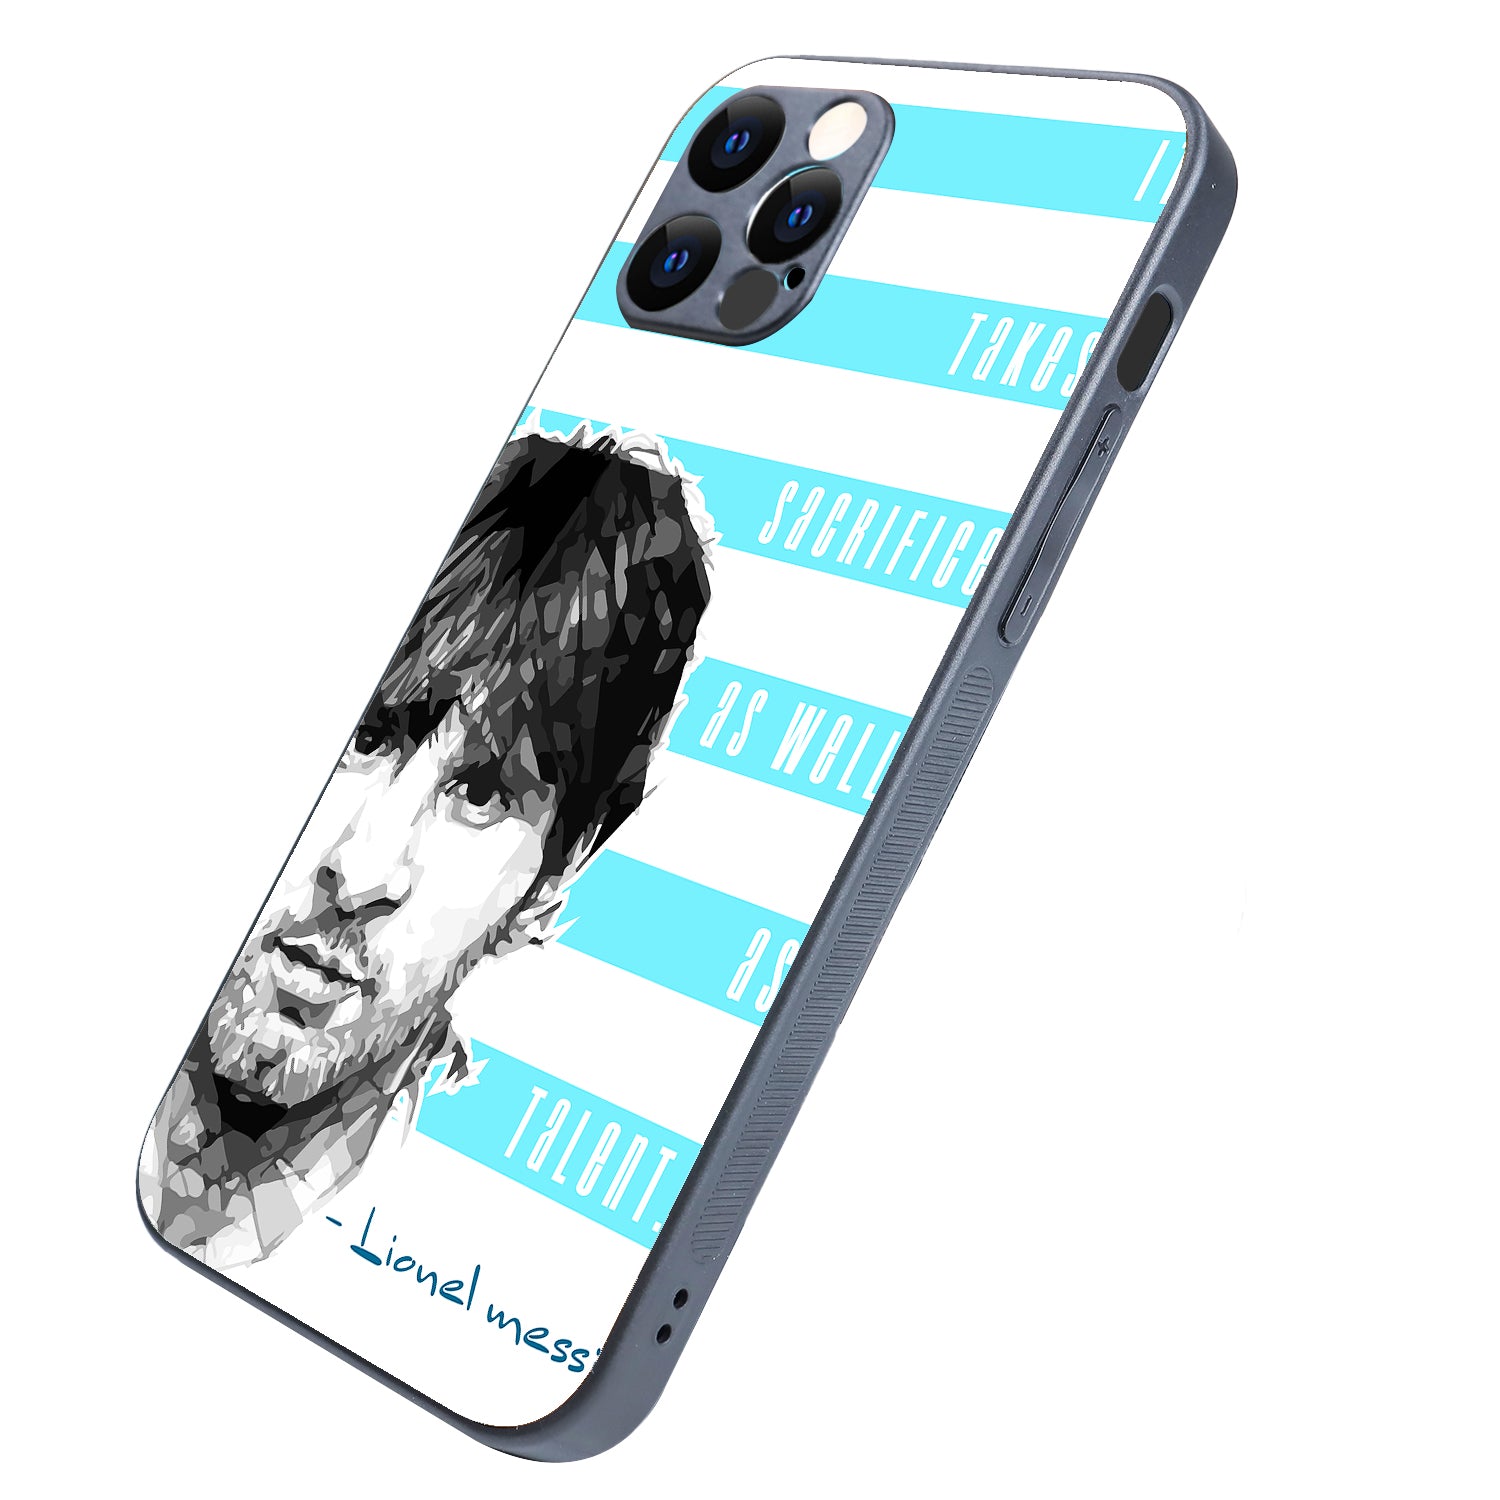 Messi Quote Sports iPhone 12 Pro Case